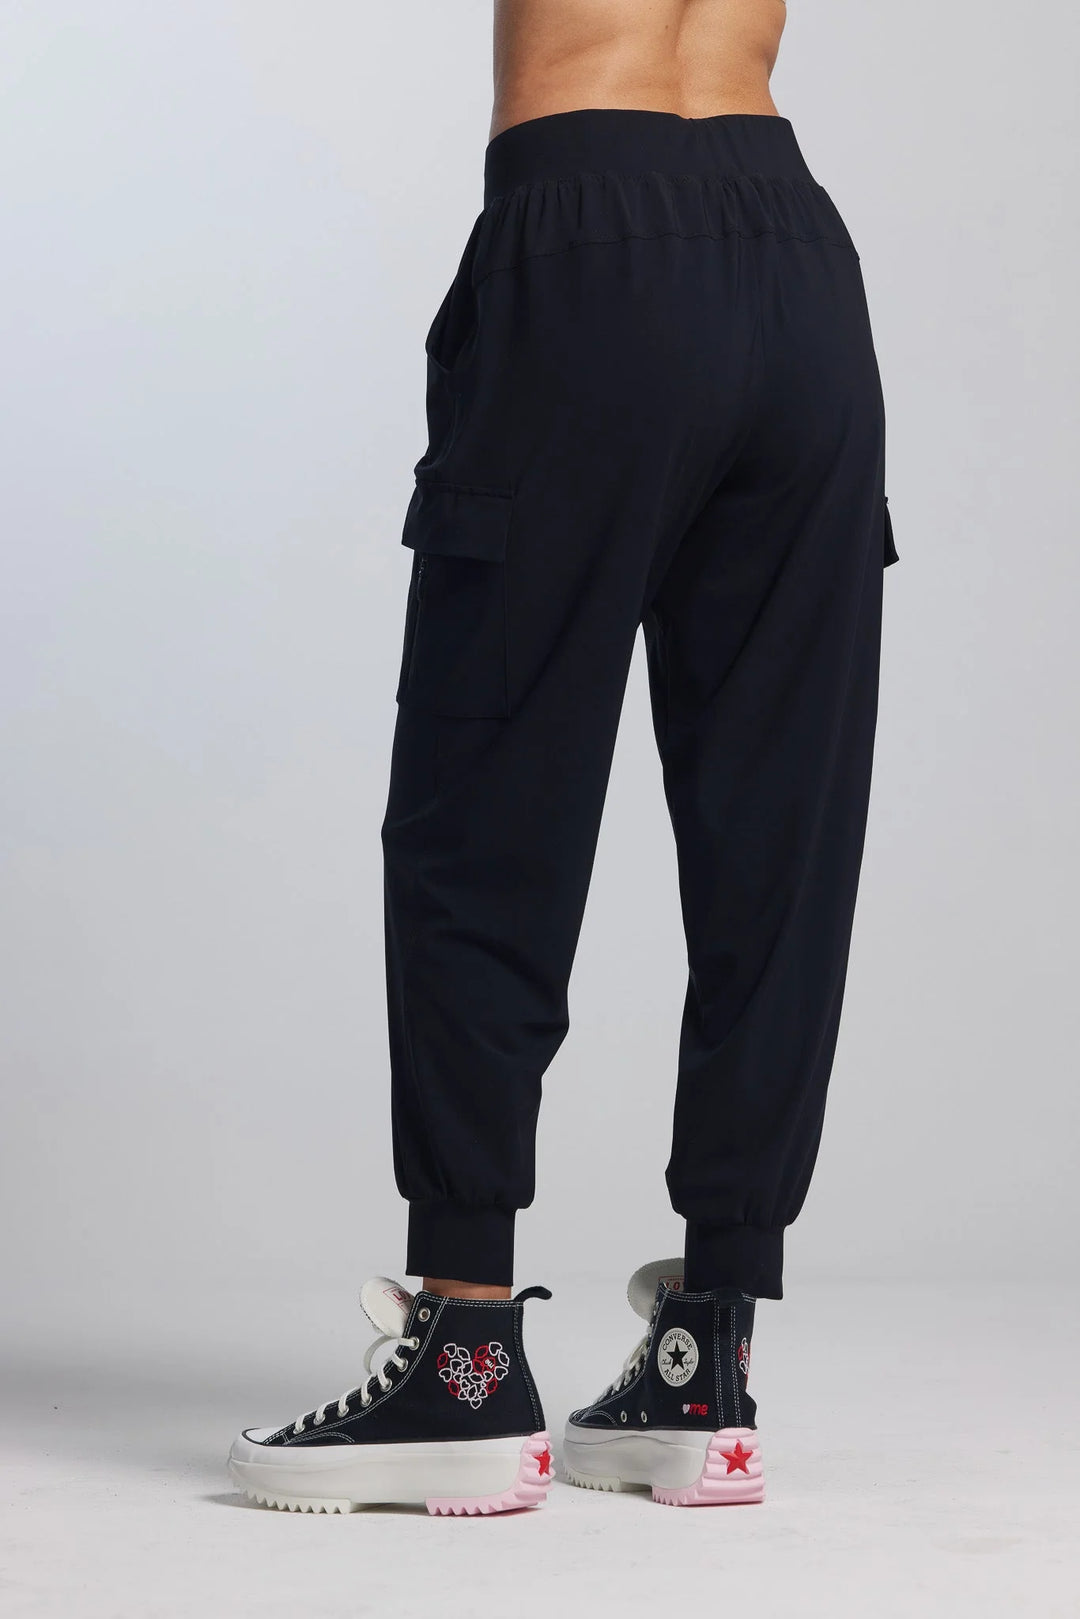 Zip Detailed Pocketed Cuffed Pant